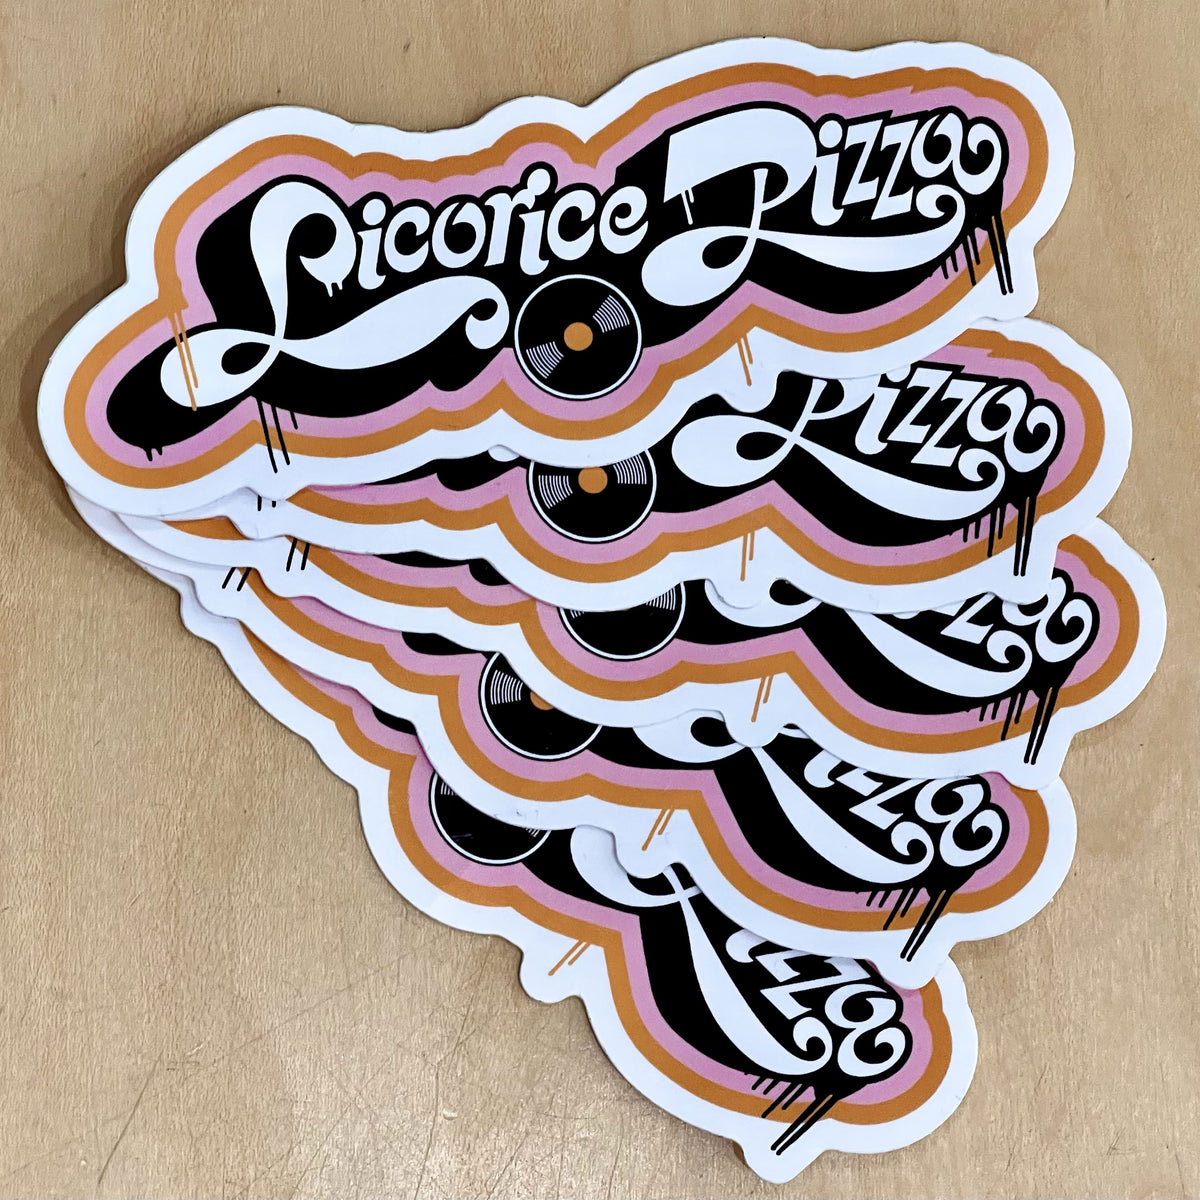 Stickers, 5 pack, Licorice Pizza logo, 5 inch x 1.87